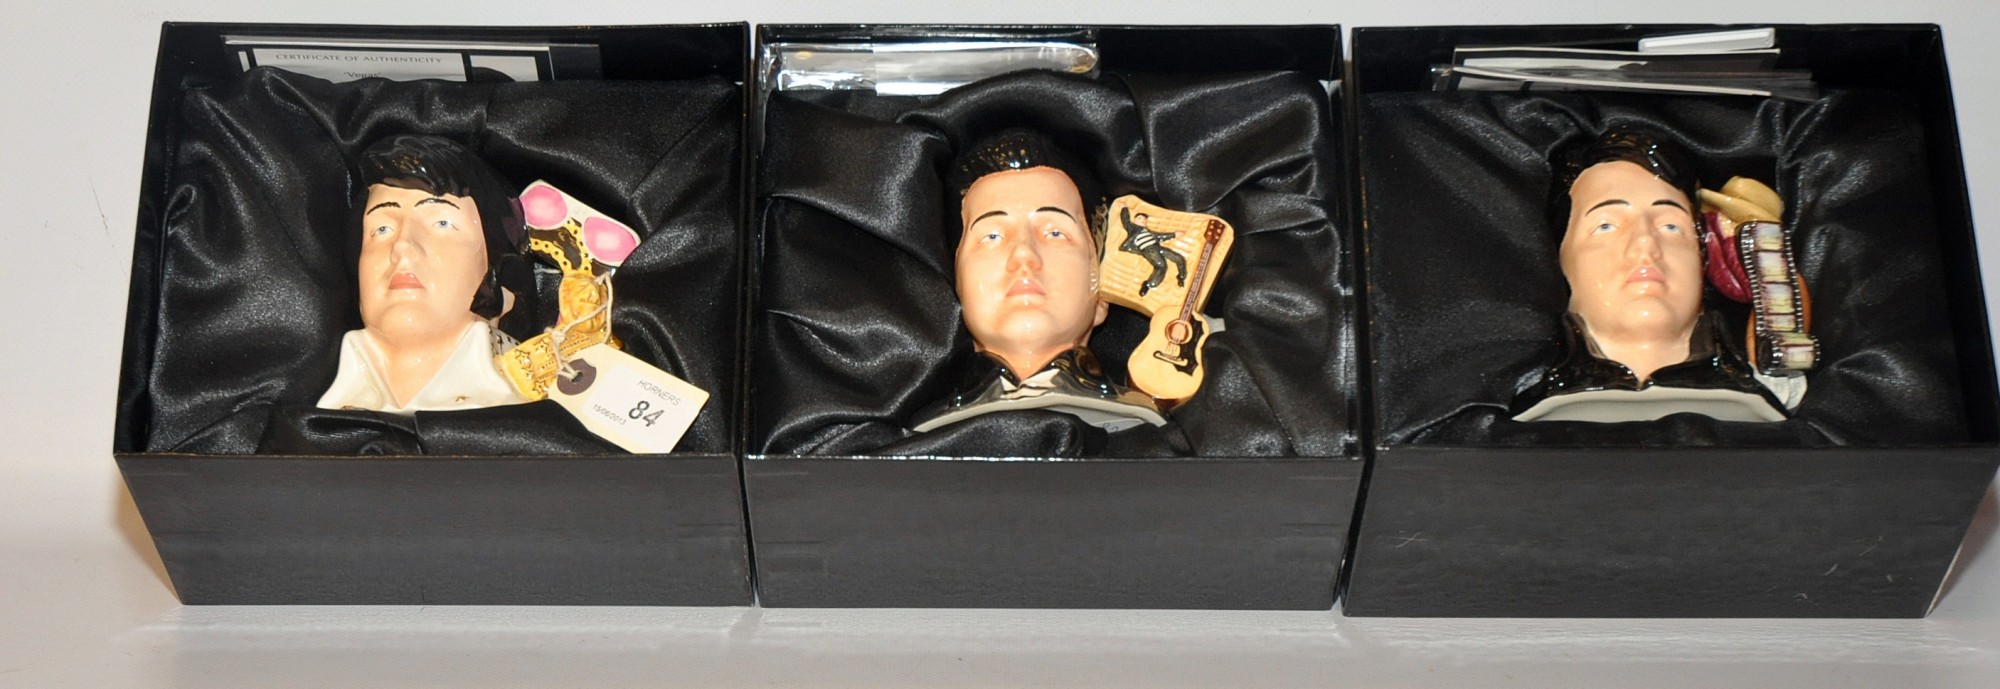 THREE BOXED ROYAL DOULTON ELVIS SIGNATURE CHARACTER JUGS EP16, EP14, EP15 - TO COMMEMORATE 30